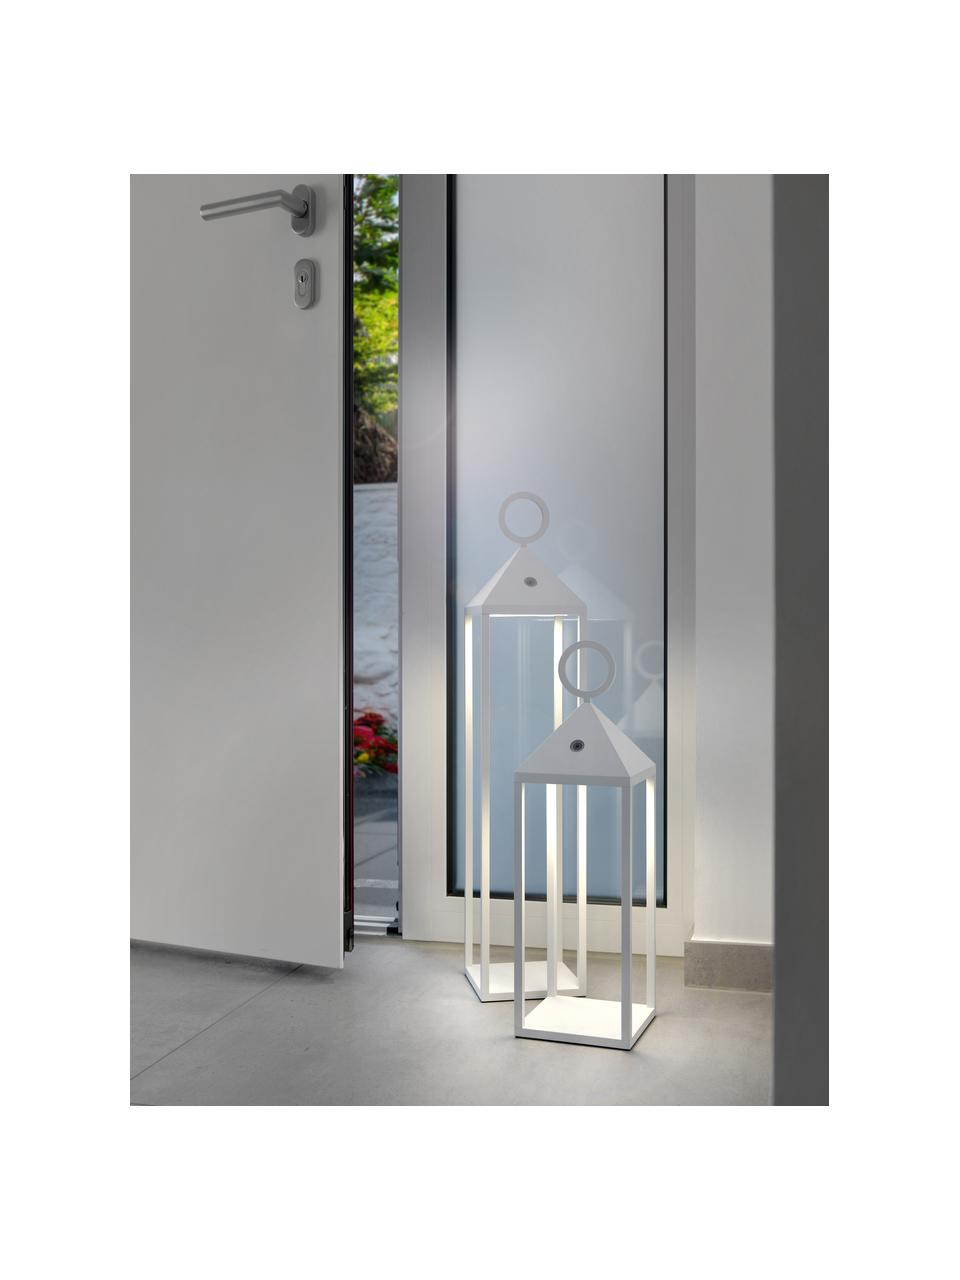 Mobiele dimbare LED outdoor lamp Cargo, Diffuser: kunststof, Wit, transparant, B 14 x H 67 cm